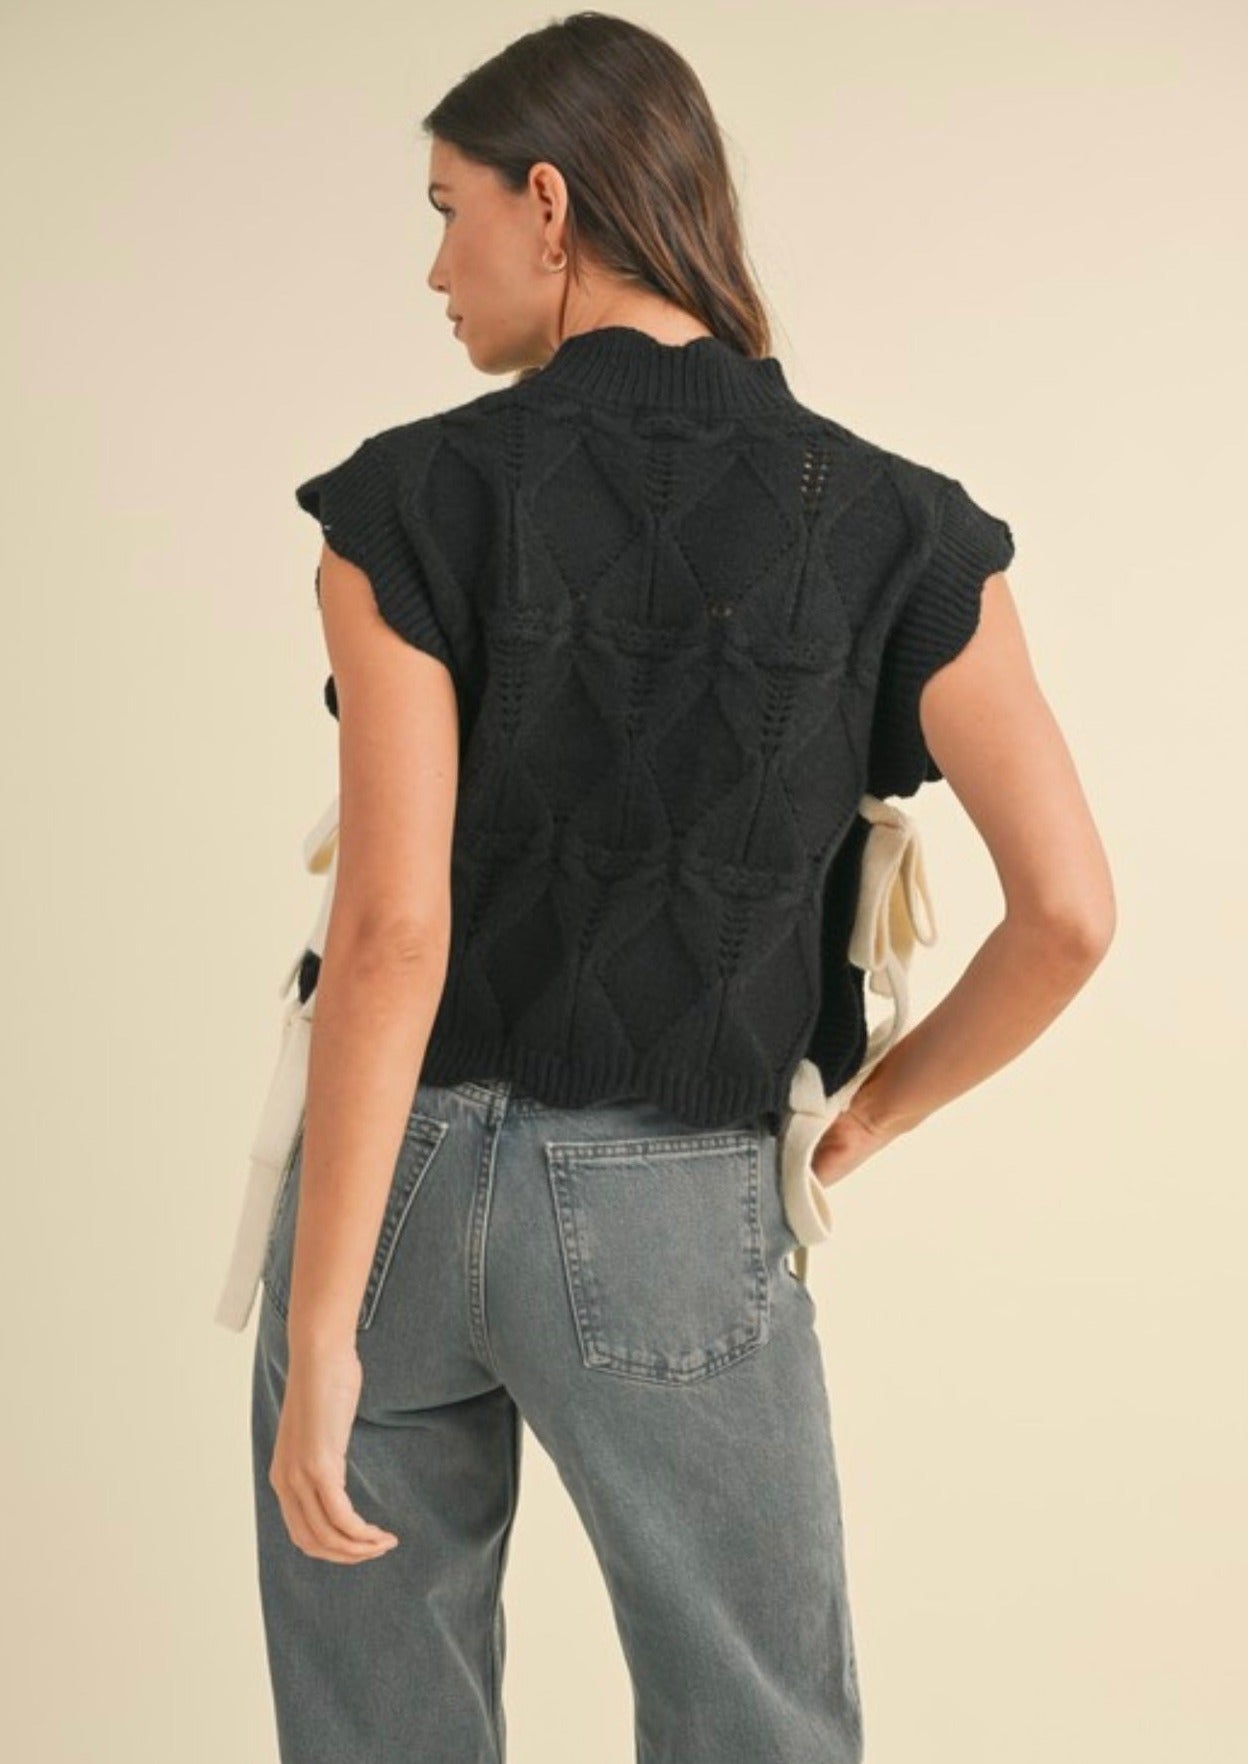 Cable Knit Scalloped Sweater Vest with Contrast Side Bow - Black